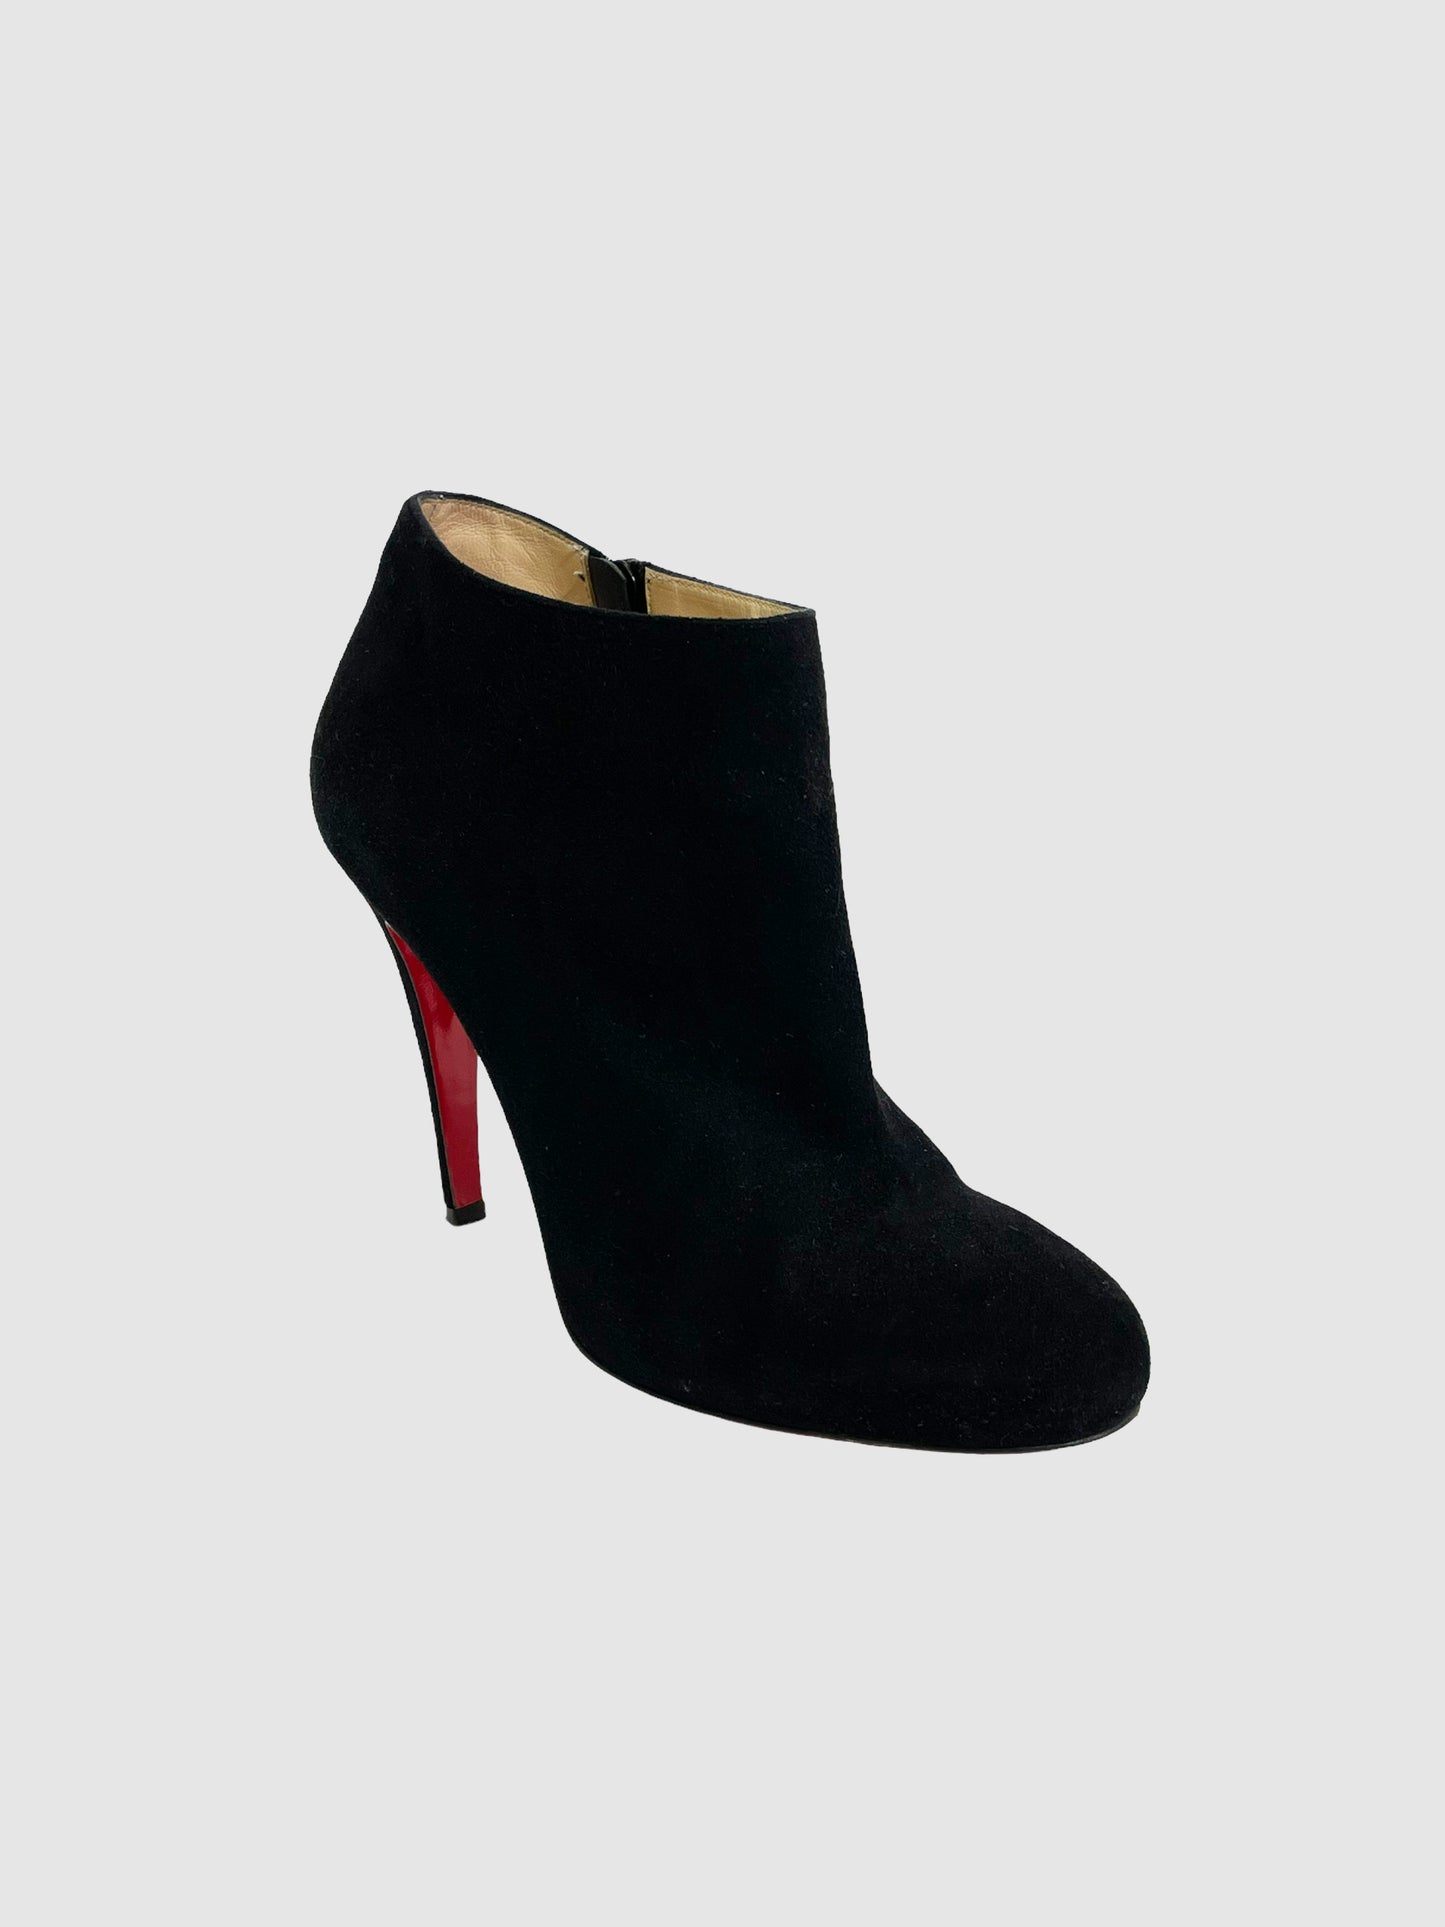 Christian Louboutin Black Suede Boots - Size 38.5